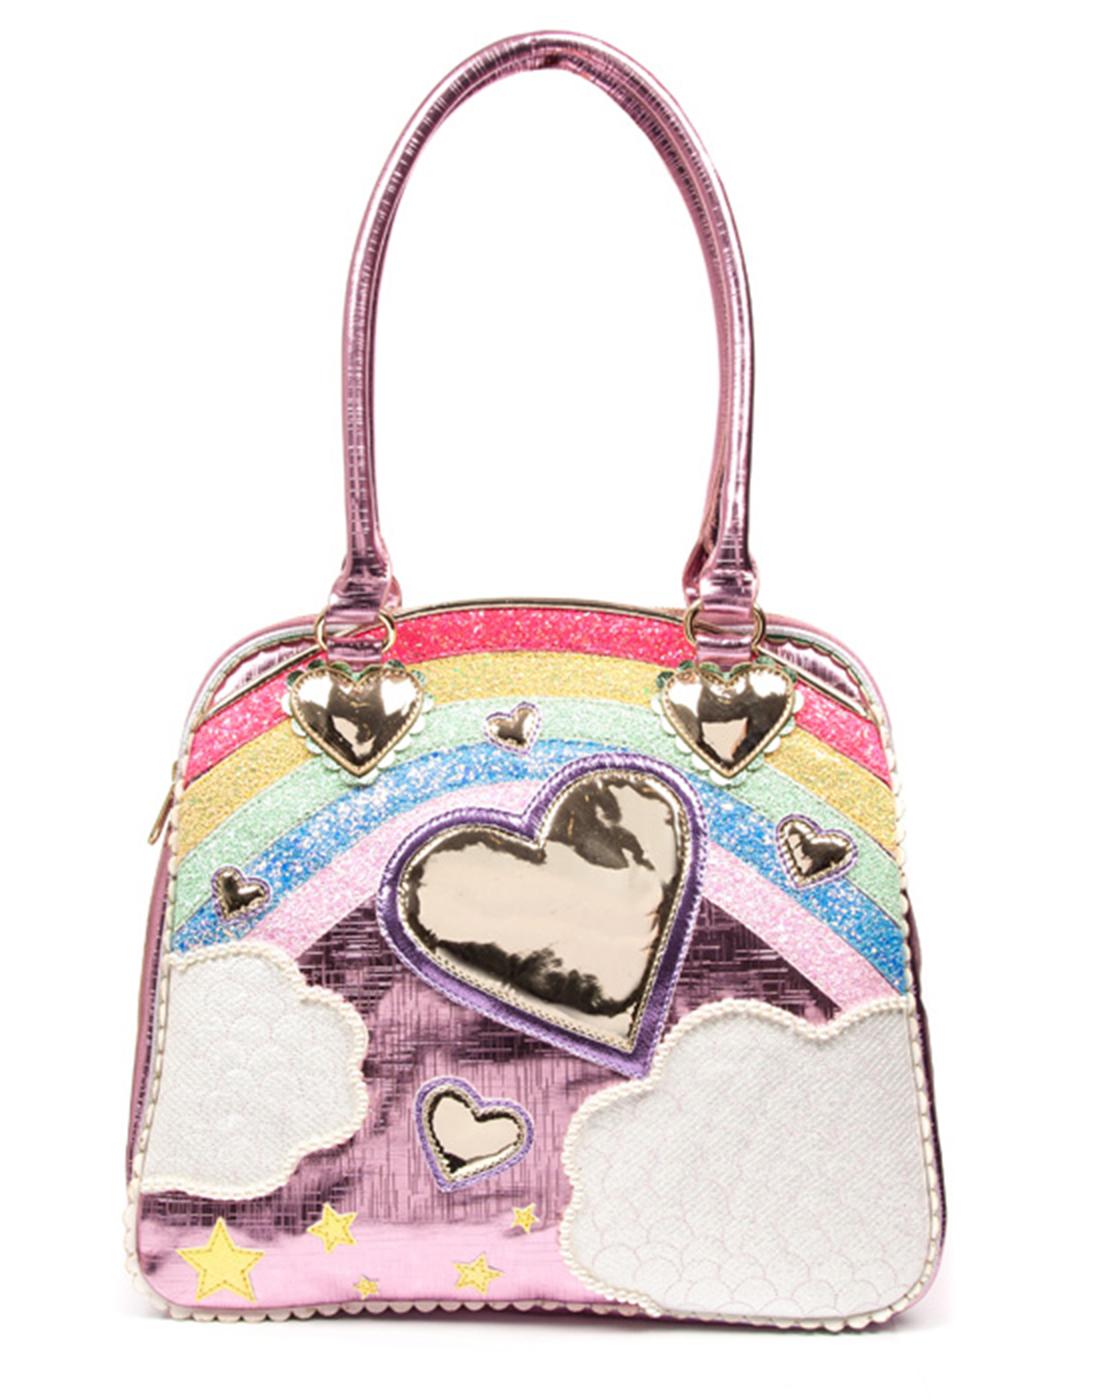 IRREGULAR CHOICE Over The Rainbow Bag in Pink